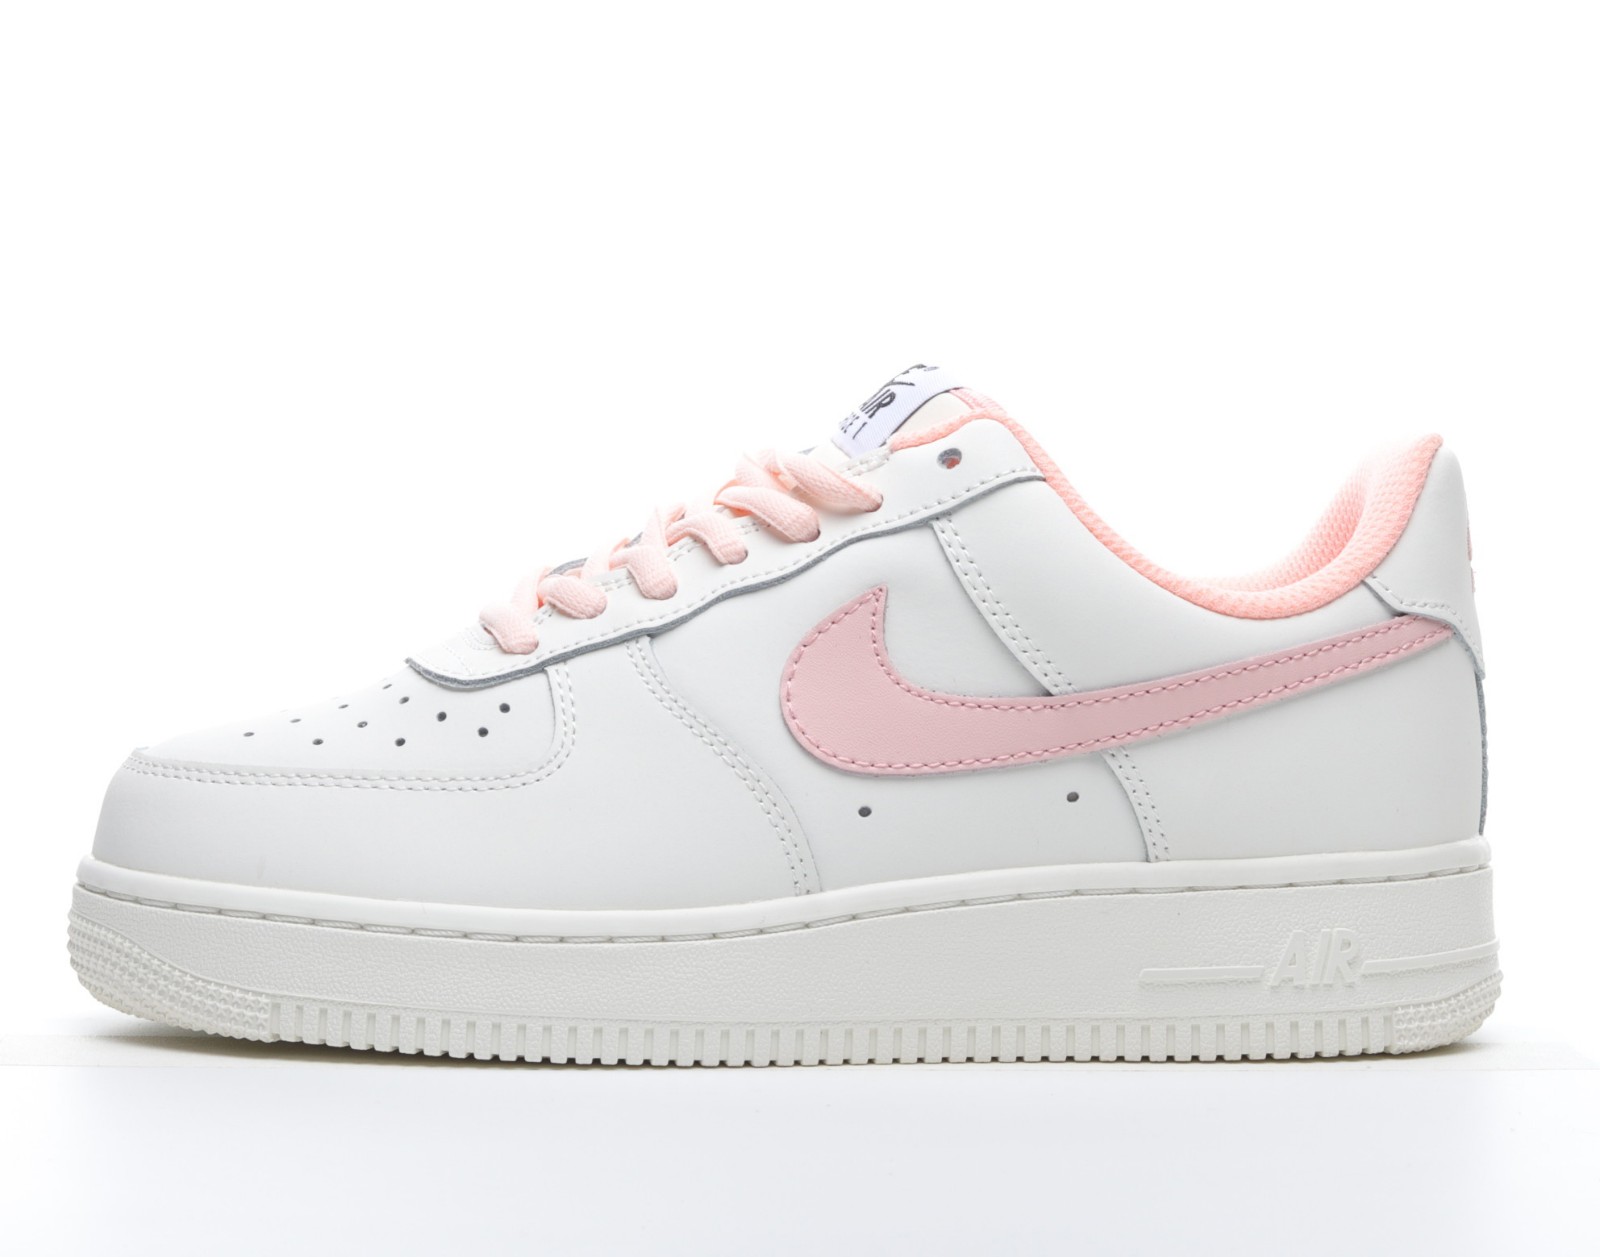 women hint sandals boots - Nike Air Force 1 07 Low Off White Pink CQ5059 - - 106